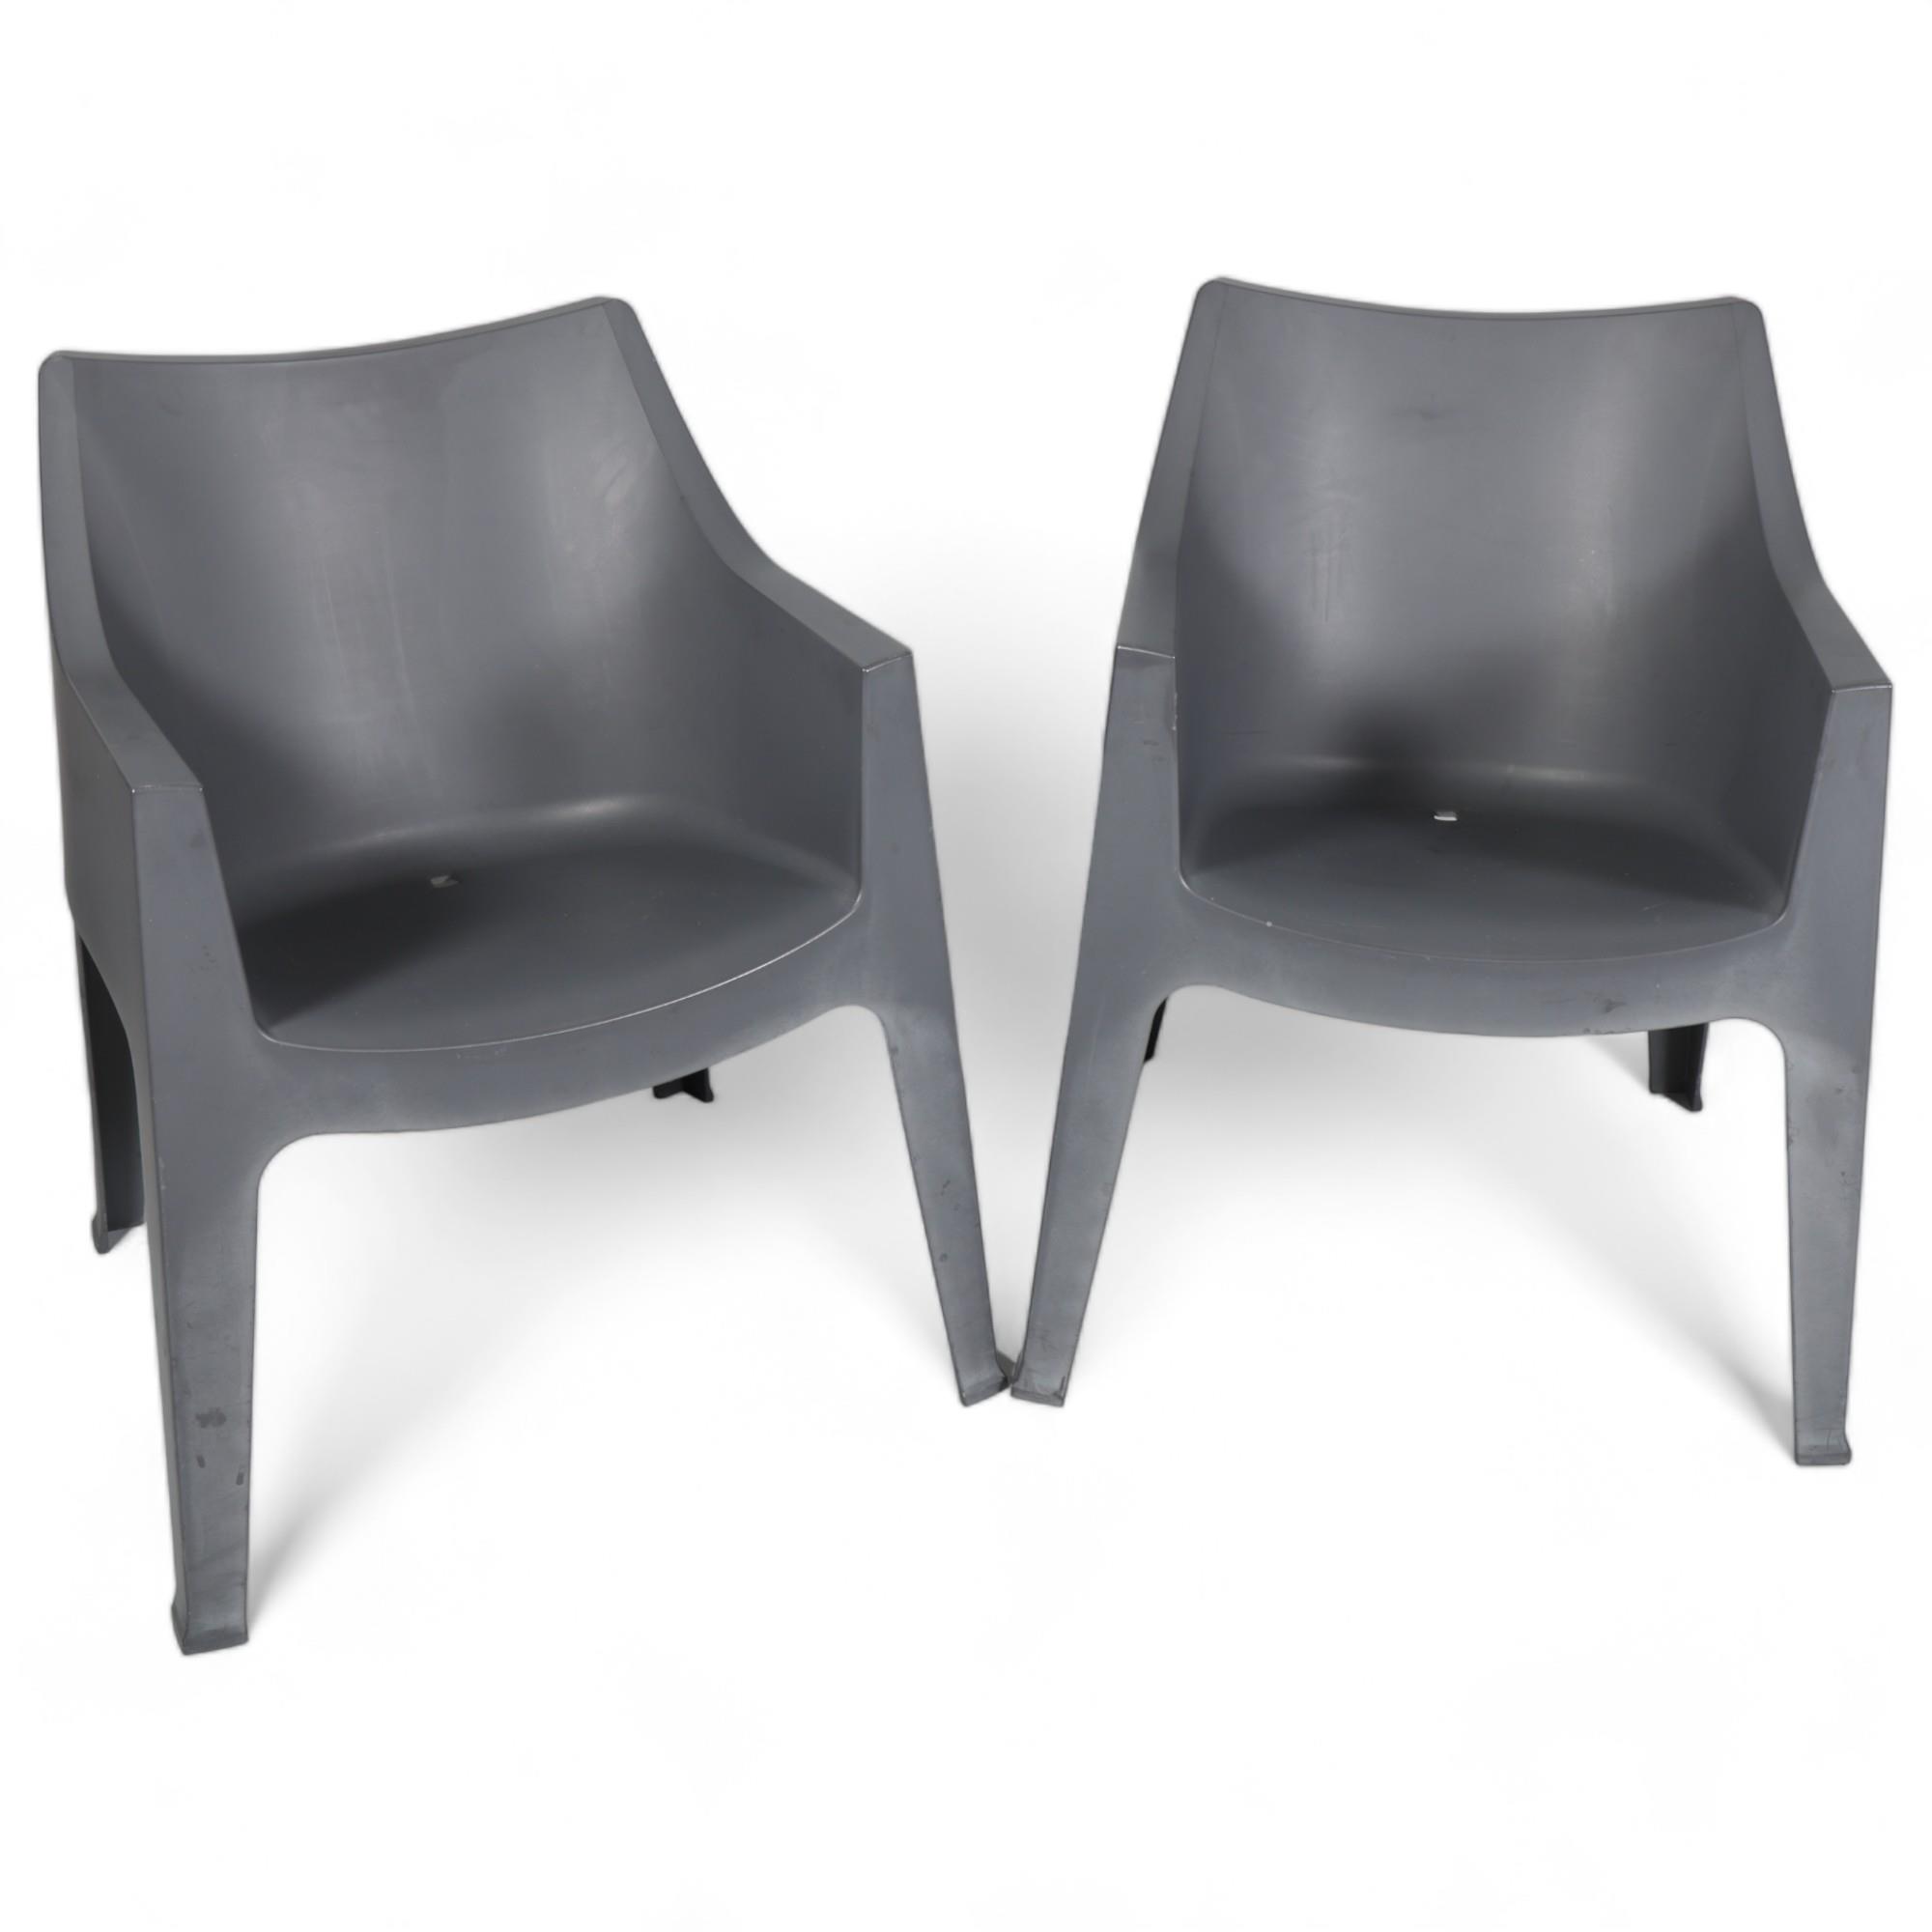 A pair of S.CAB Design Coccolana stackable garden chairs, in grey polymer, makers marks to base,